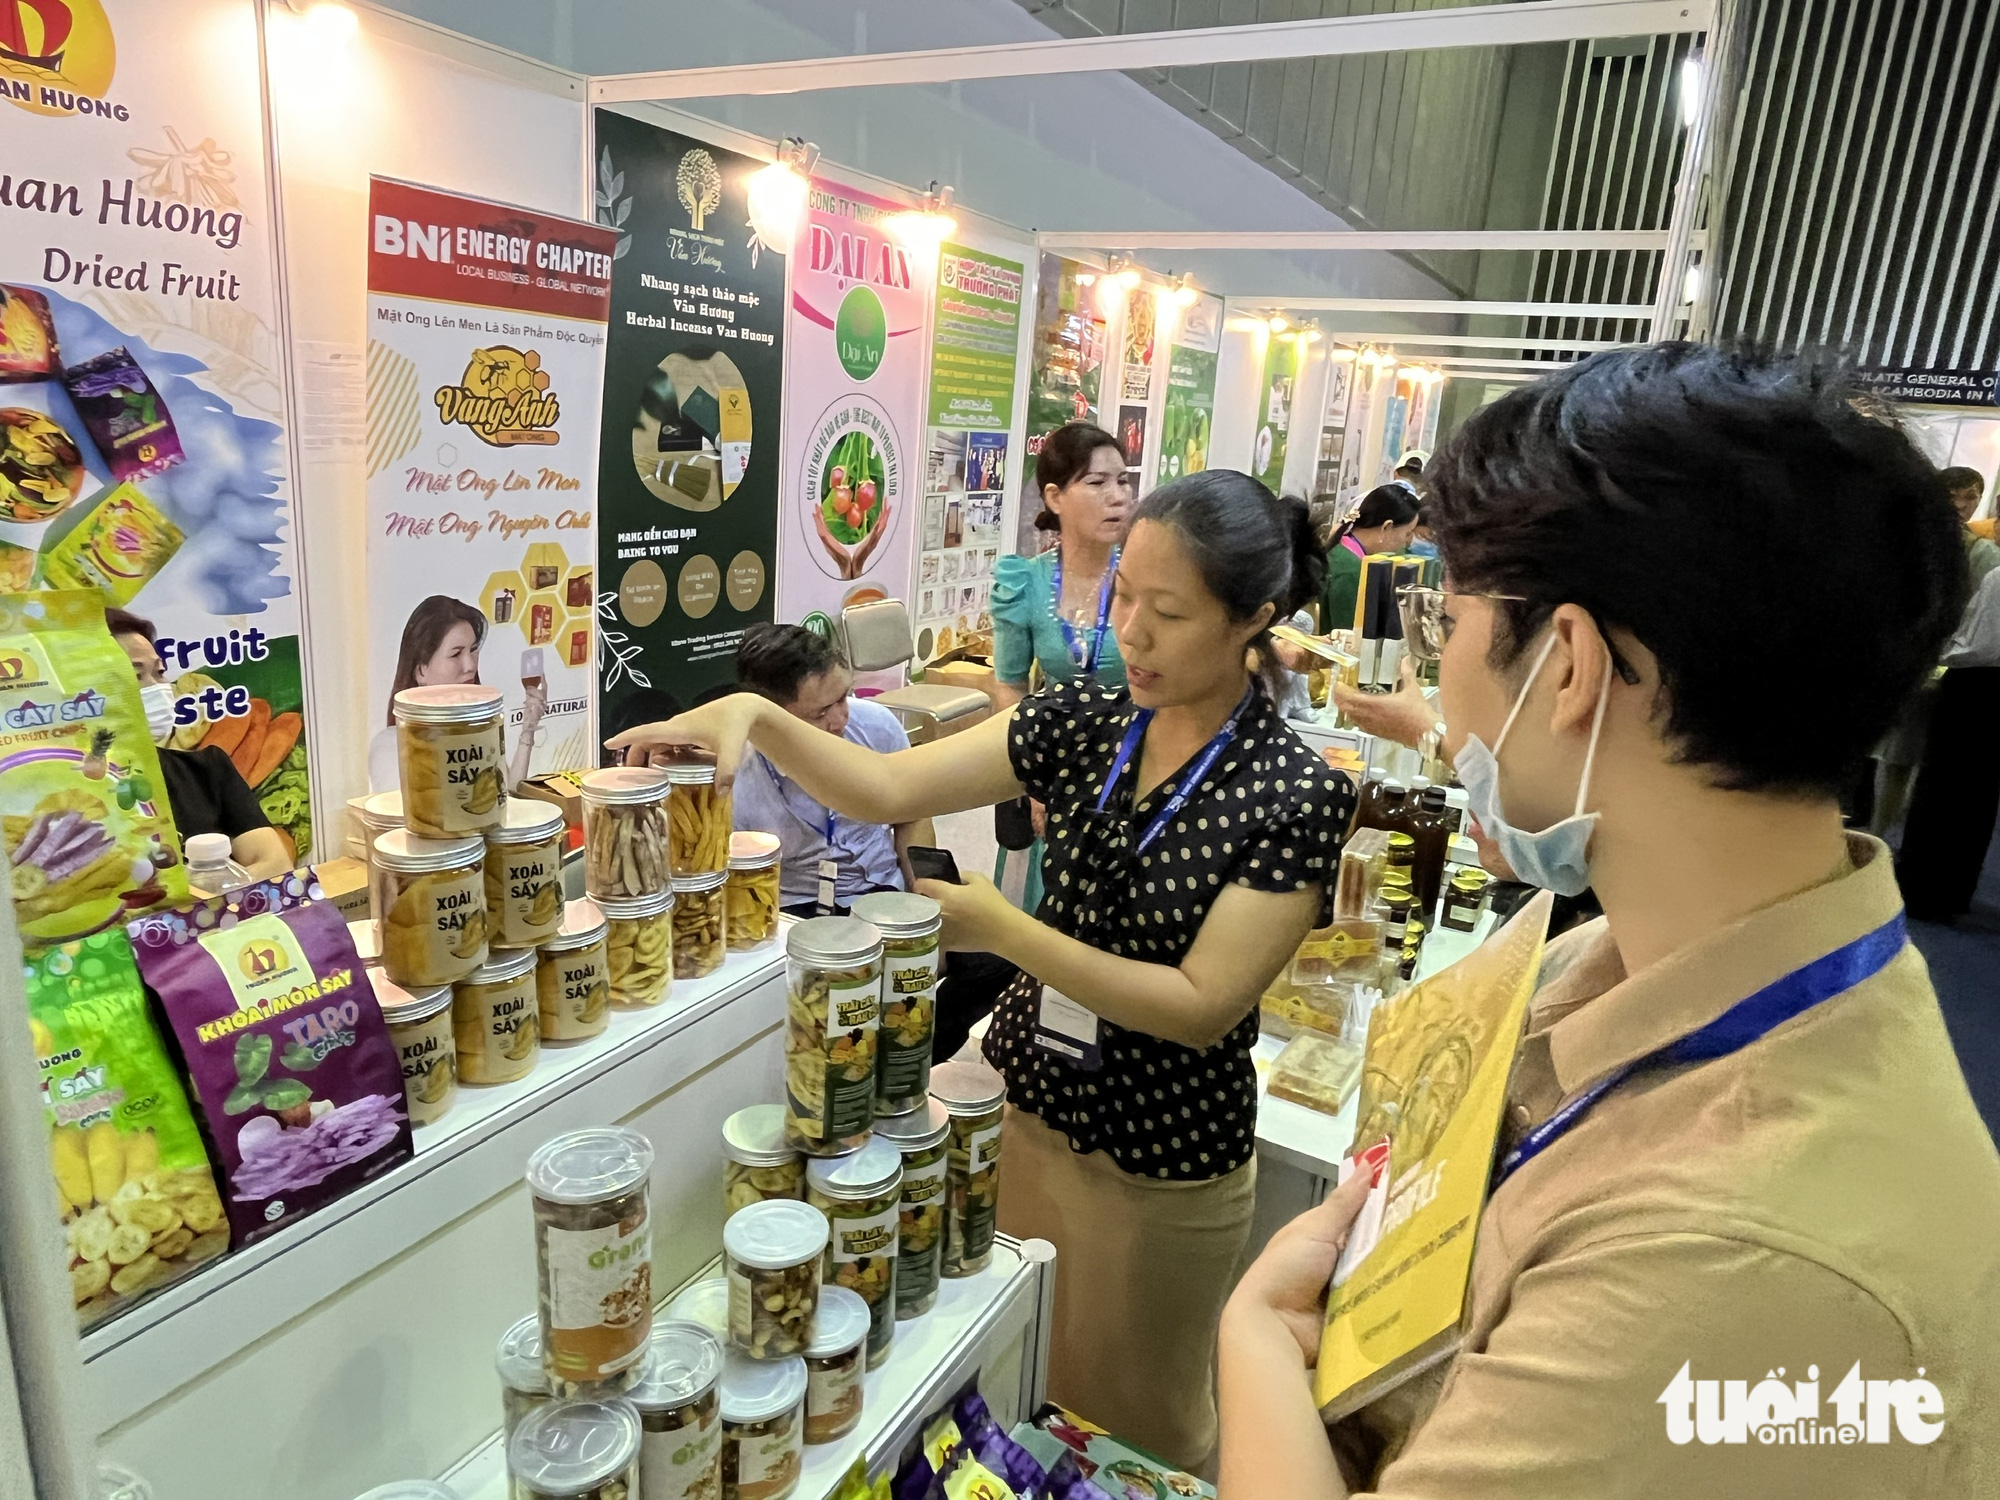 Vietnamese small and medium enterprises face many obstacles to export their products to the international market amid the rising protection in importing markets. Photo: N.Binh / Tuoi Tre